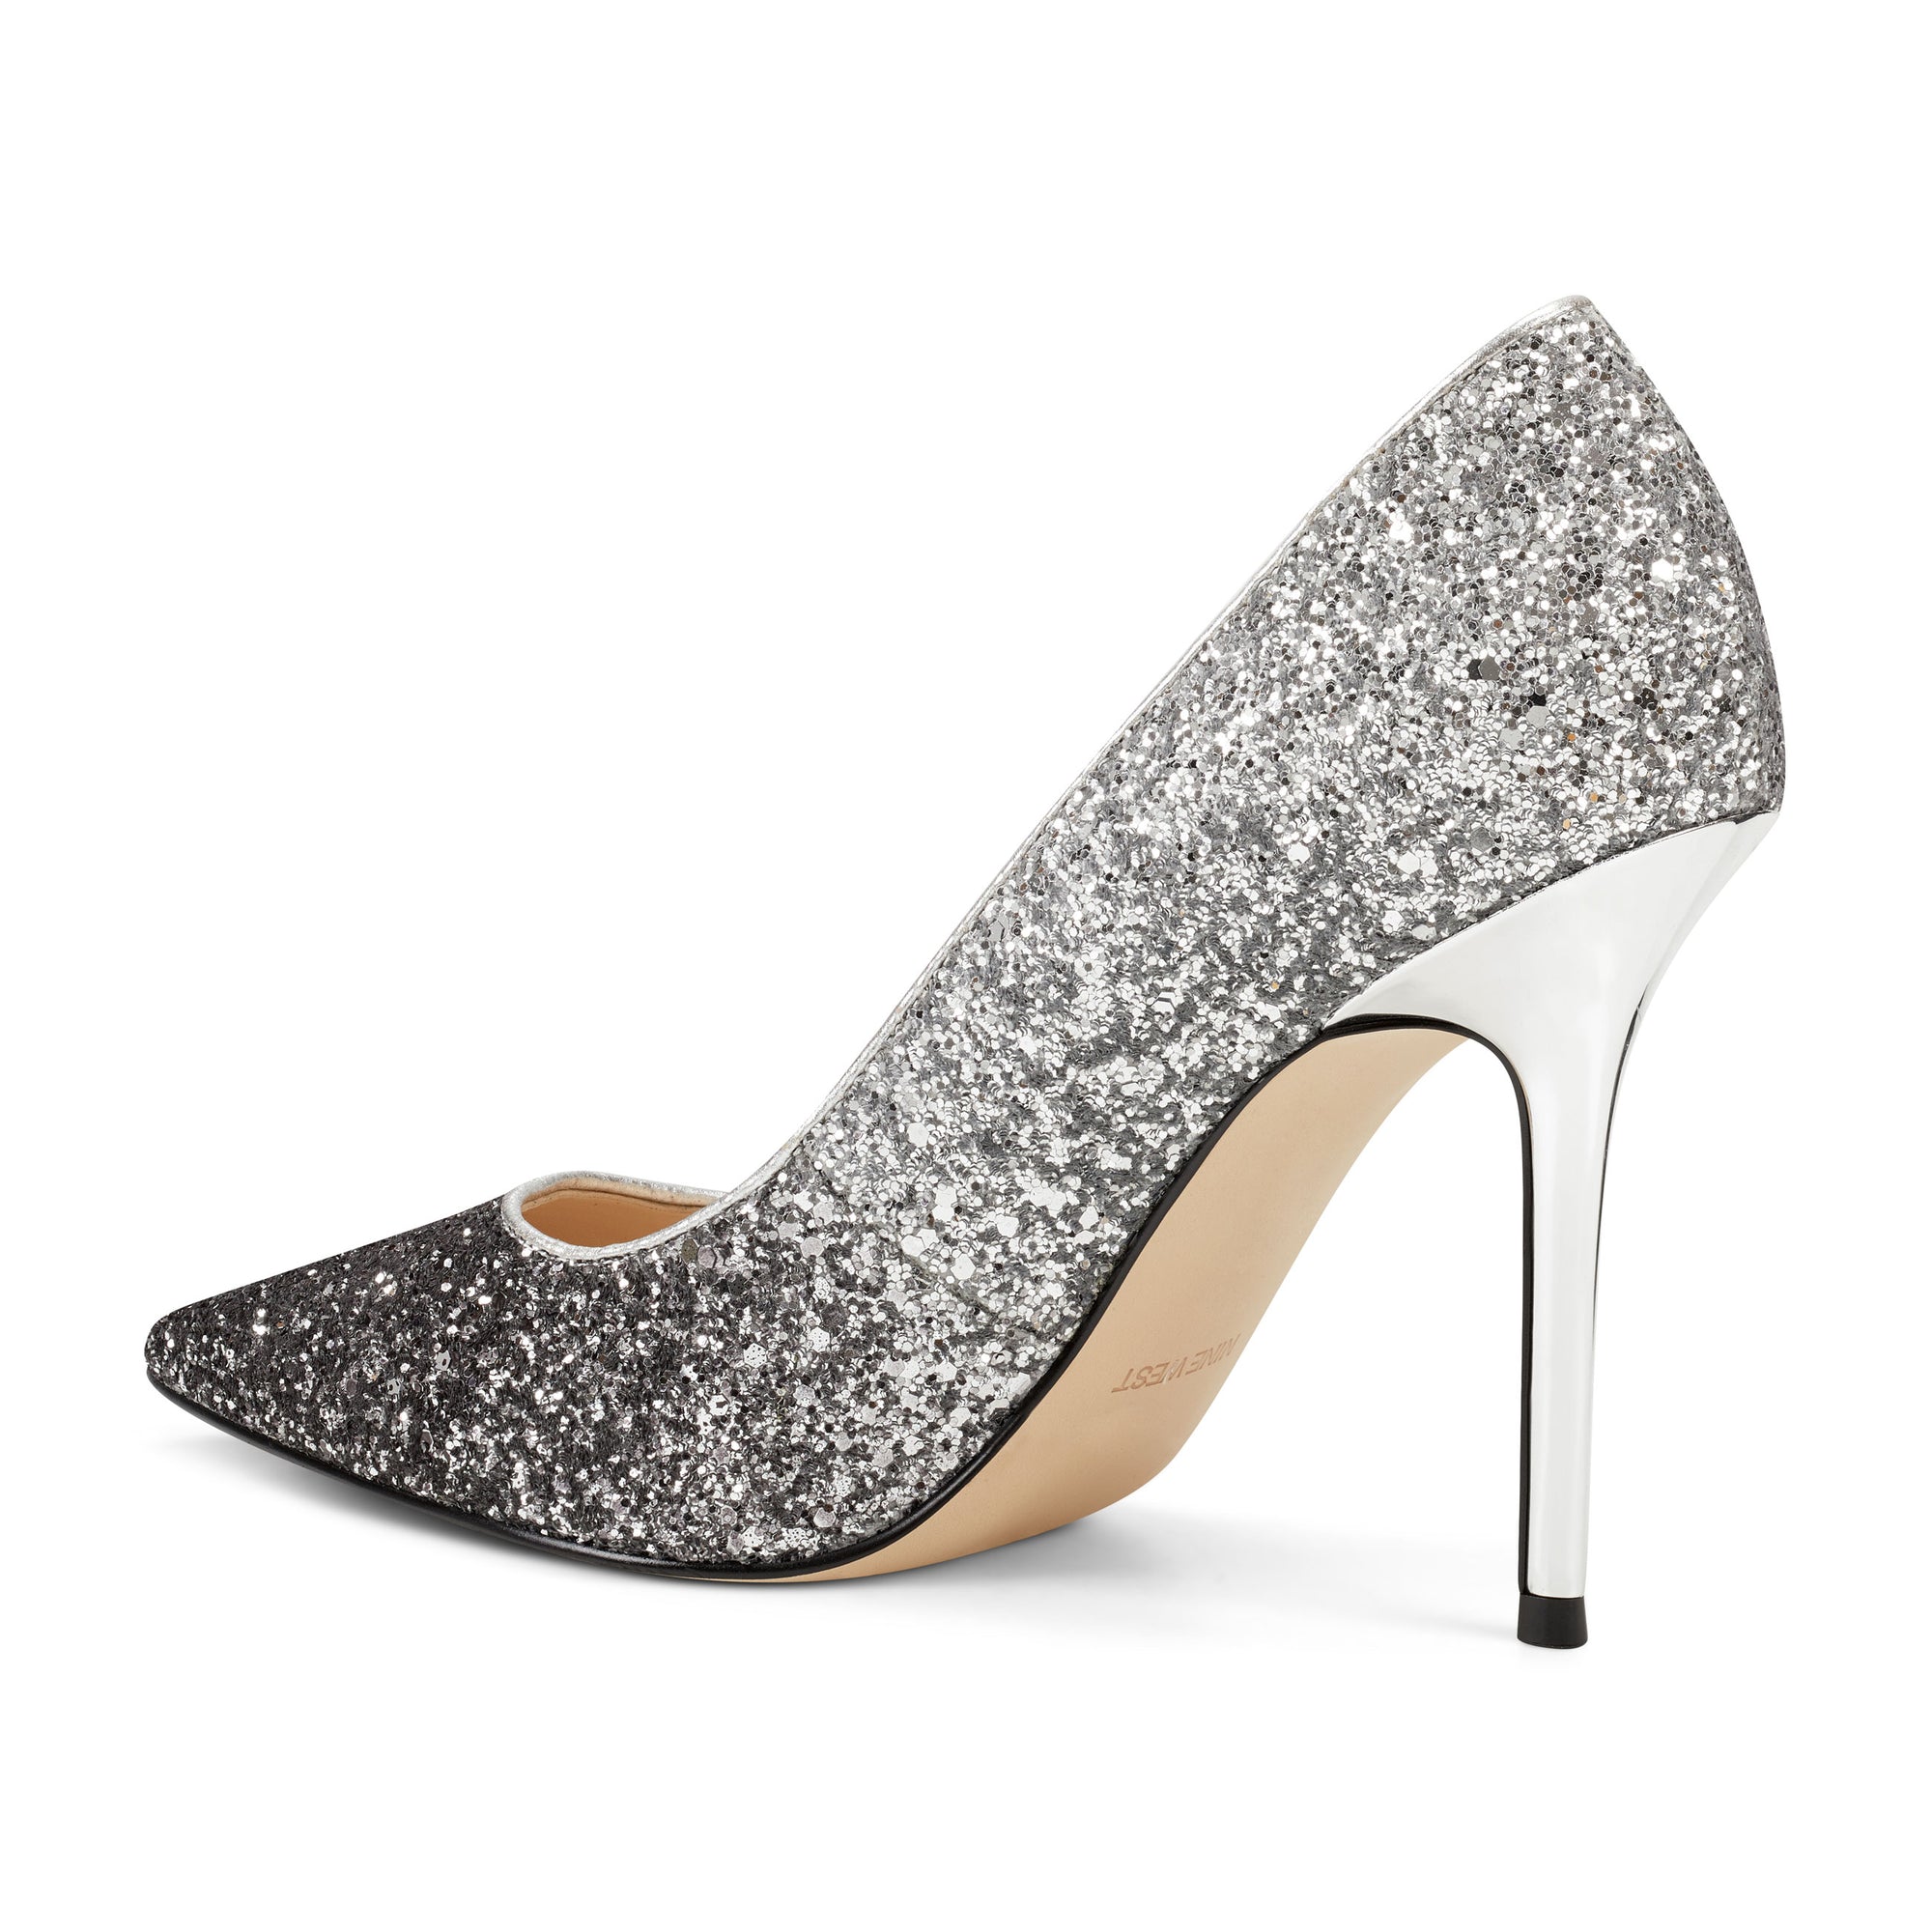 Bliss pointy toe pump - Nine West